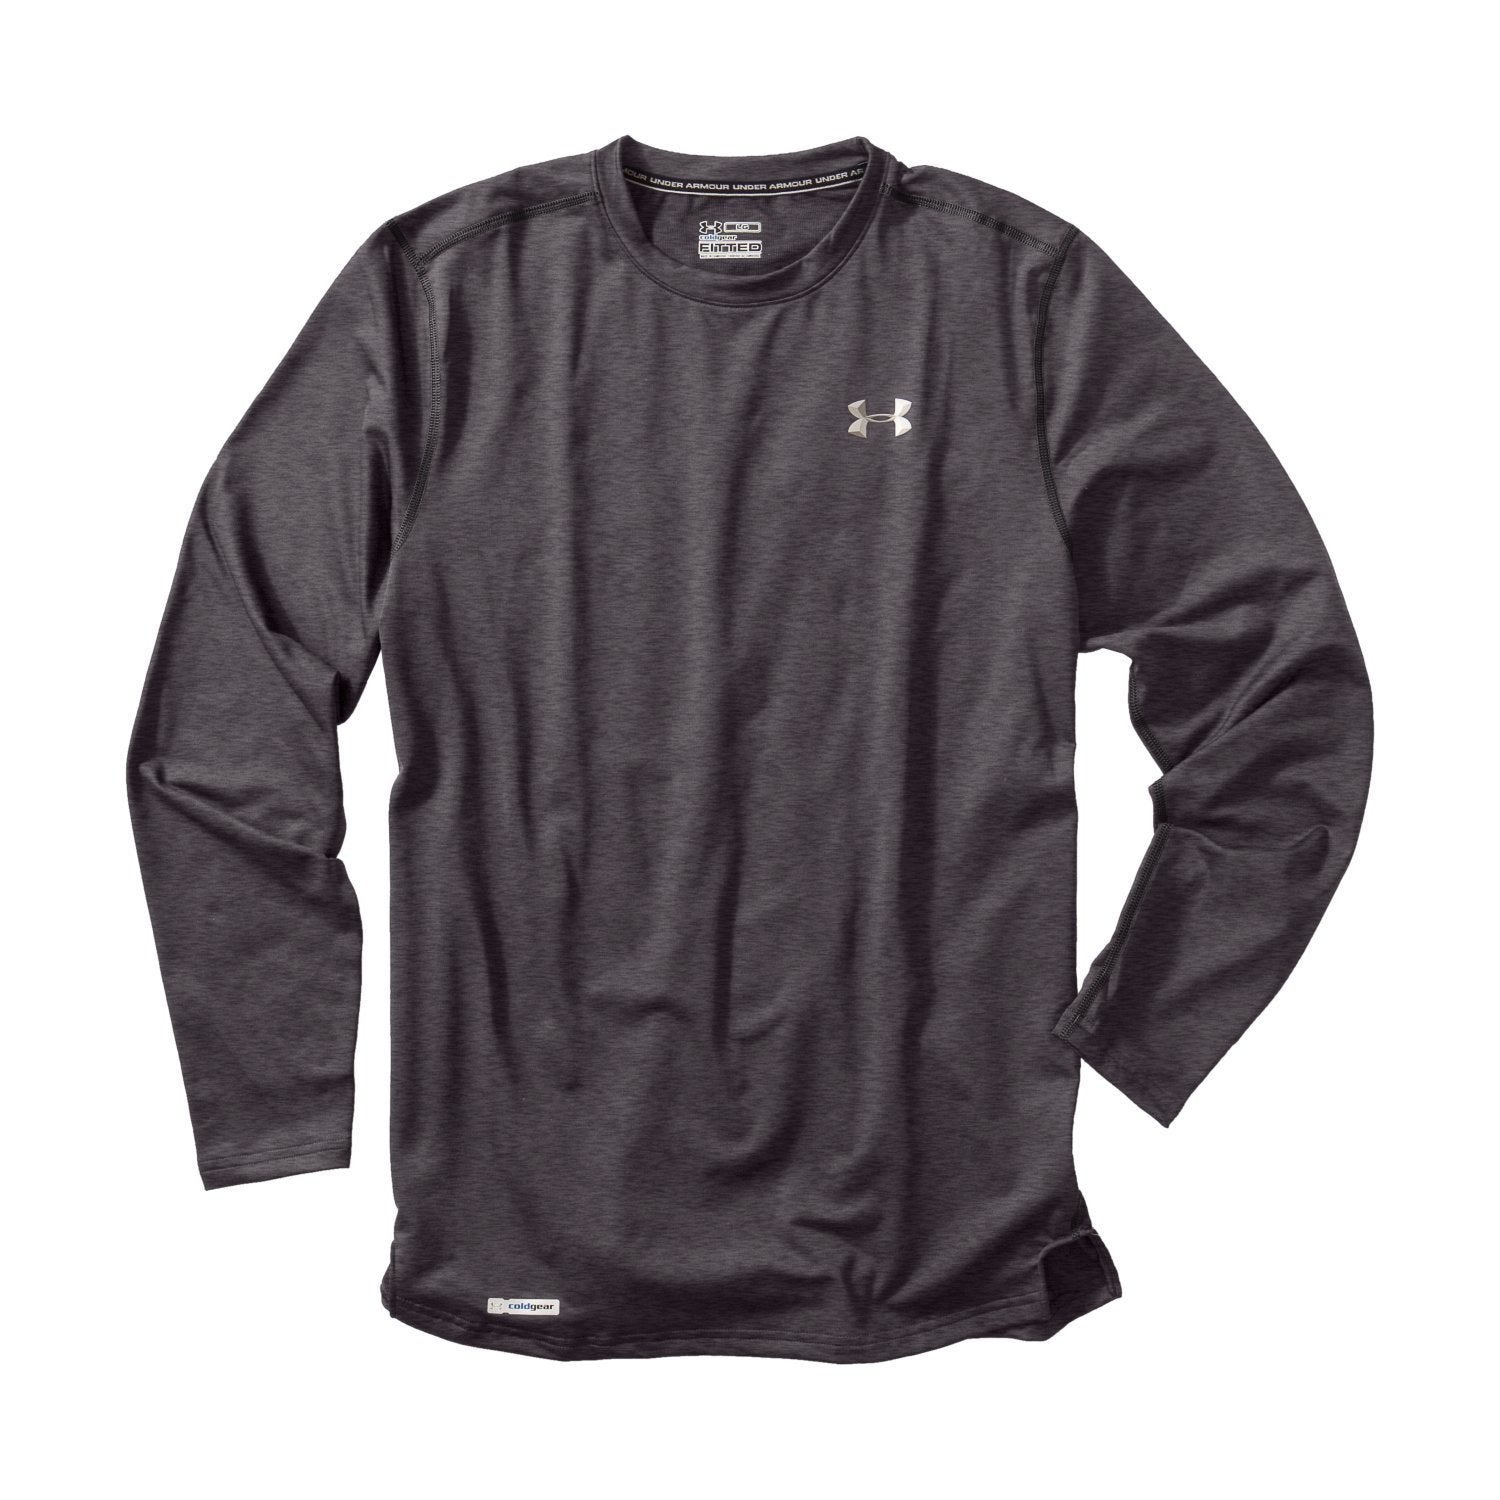 Under Armour Men's ColdGear® Fitted Long Sleeve Crew Carbon Heather/Metal